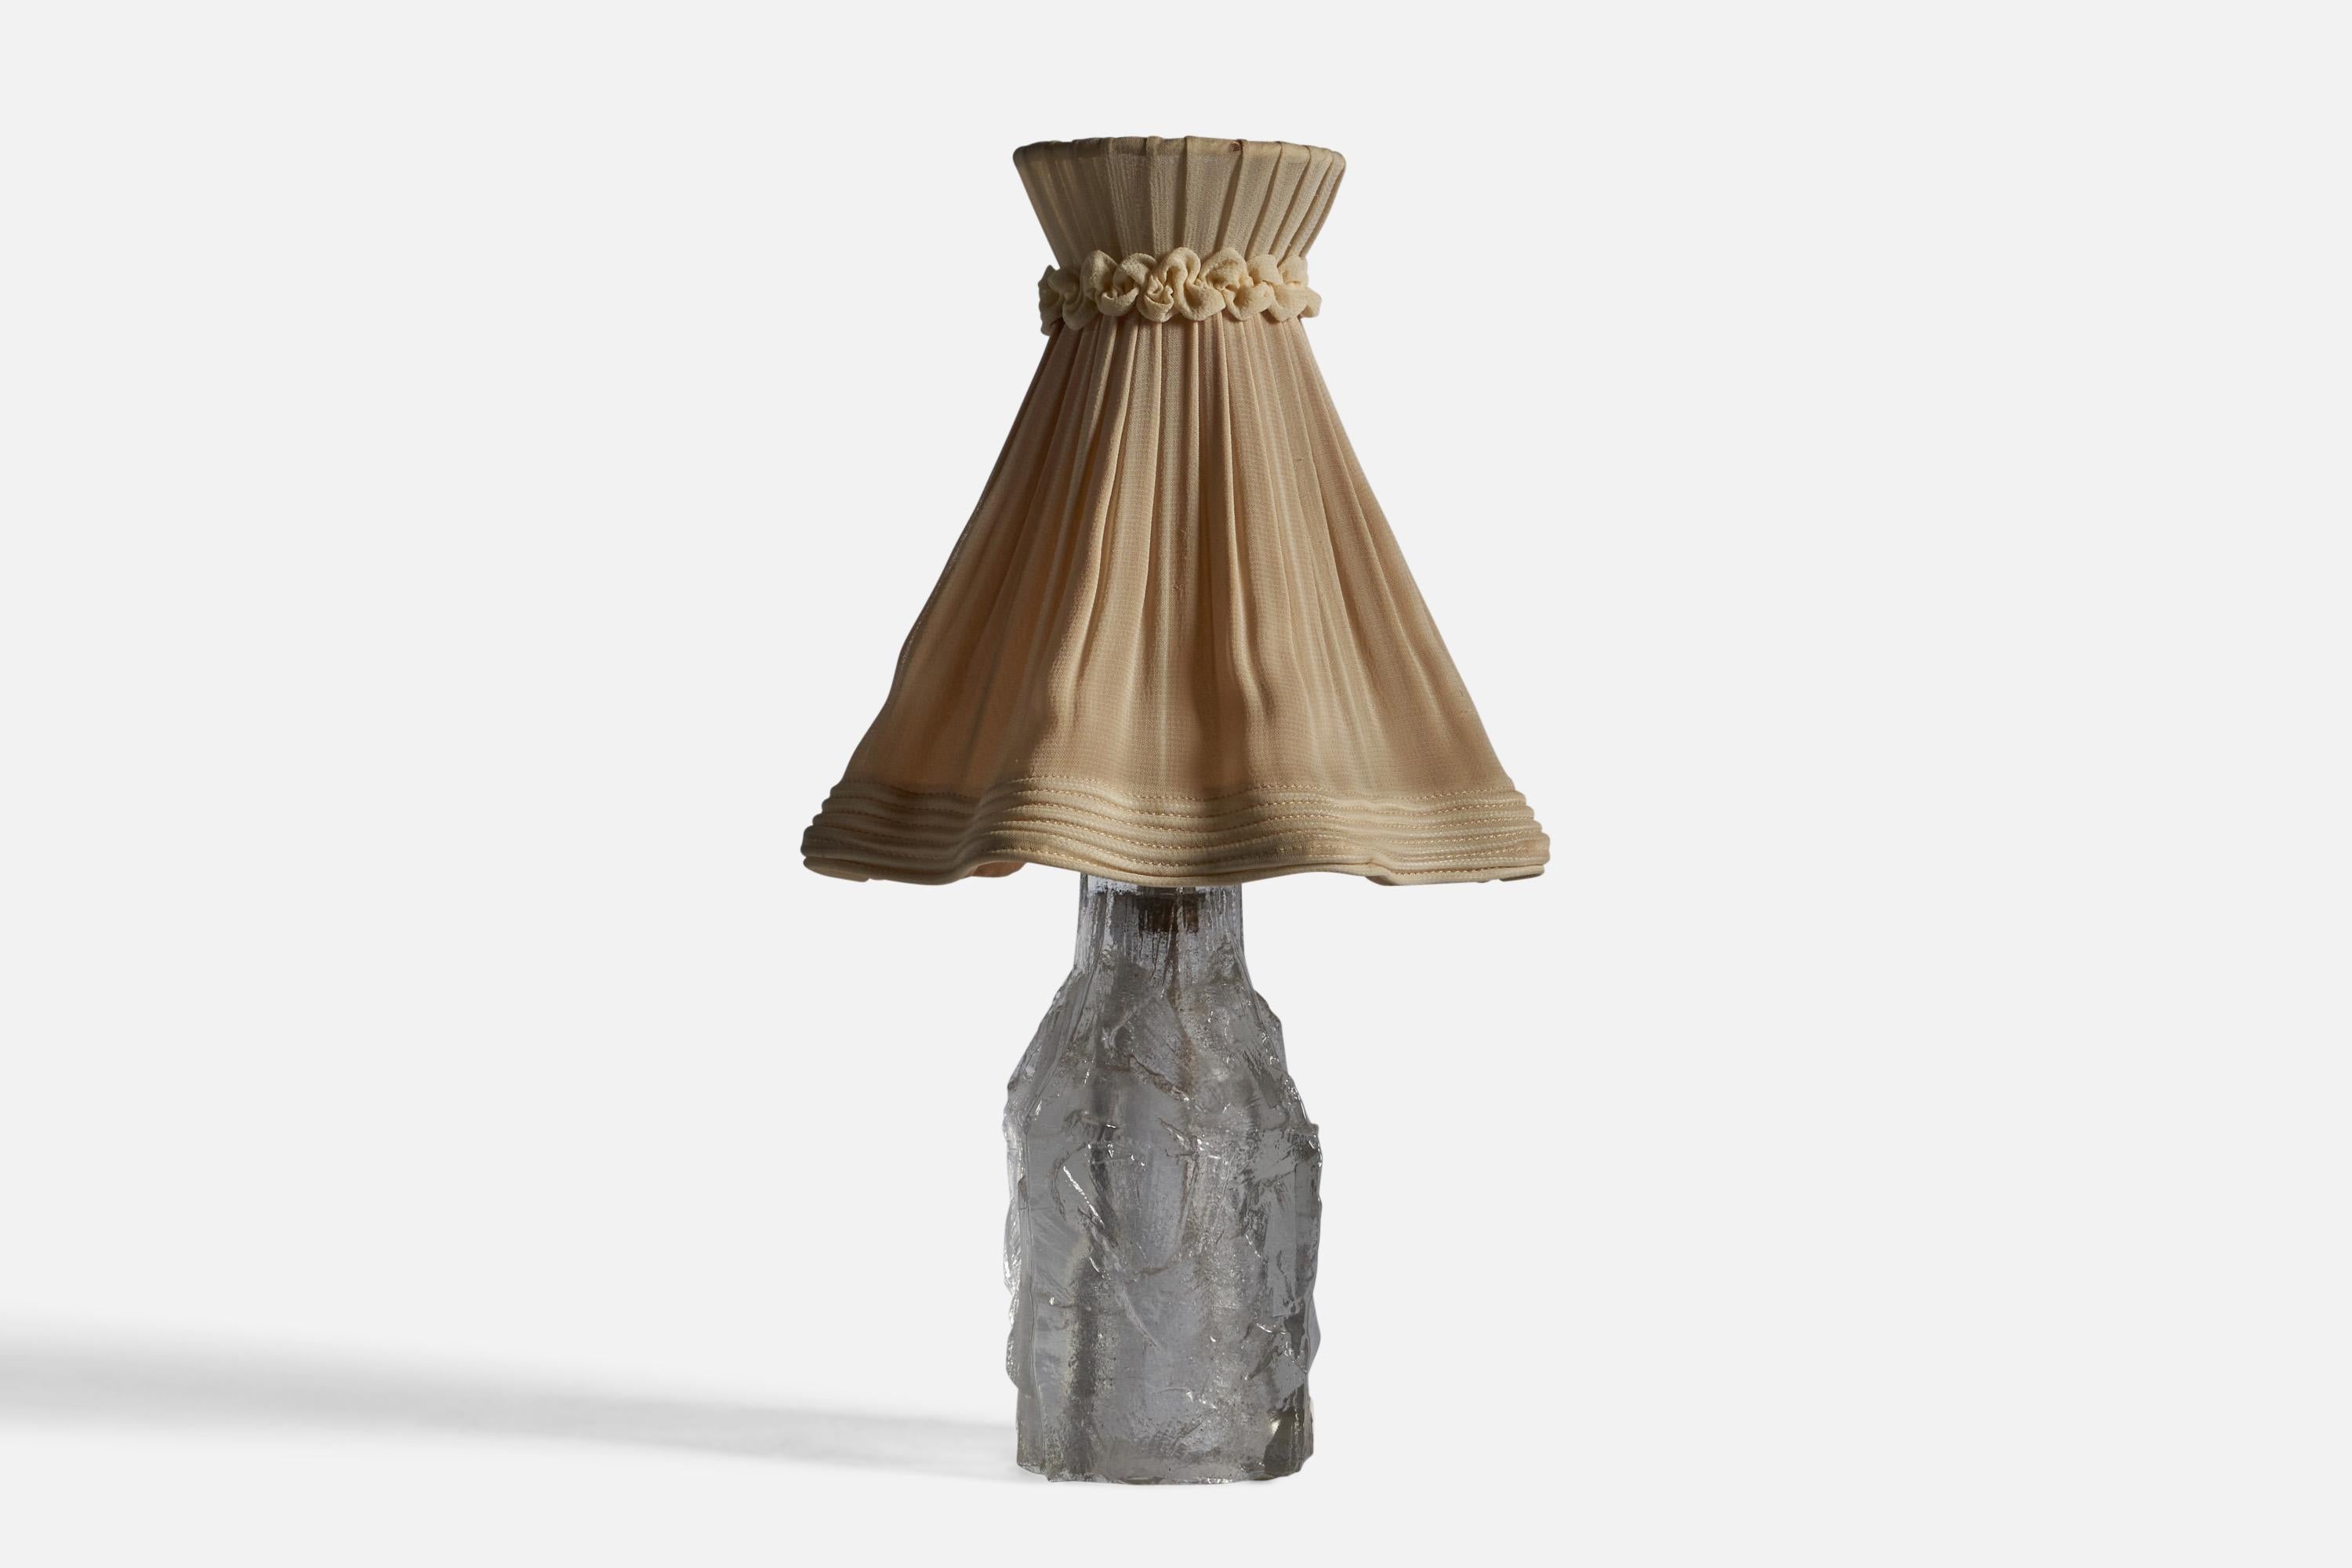 A glass and fabric table lamp, designed and produced in Sweden, c. 1940s.

Overall Dimensions: 14.5